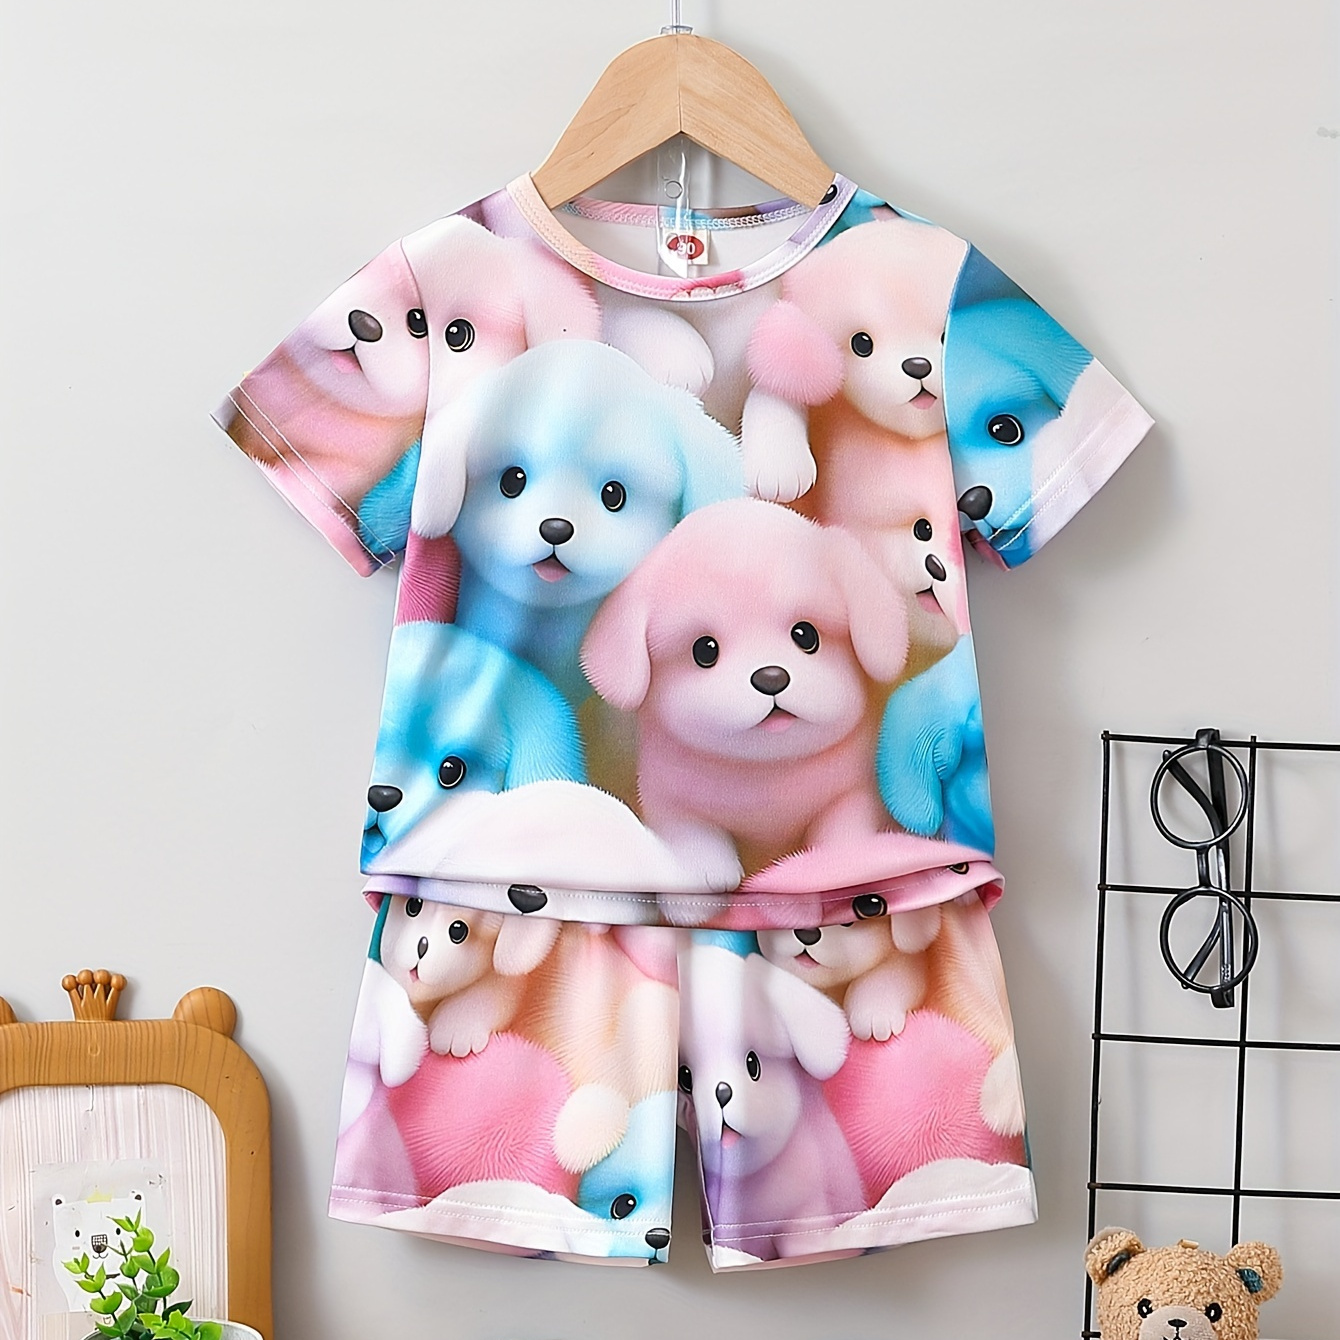 

Girls Summer Cozy Pajama Set – 3d Allover Puppy Print Short Sleeve T-shirt Top & Short Set, Comfy Breathable Pj Set, Children's Easy-care Sleepwear Outfit